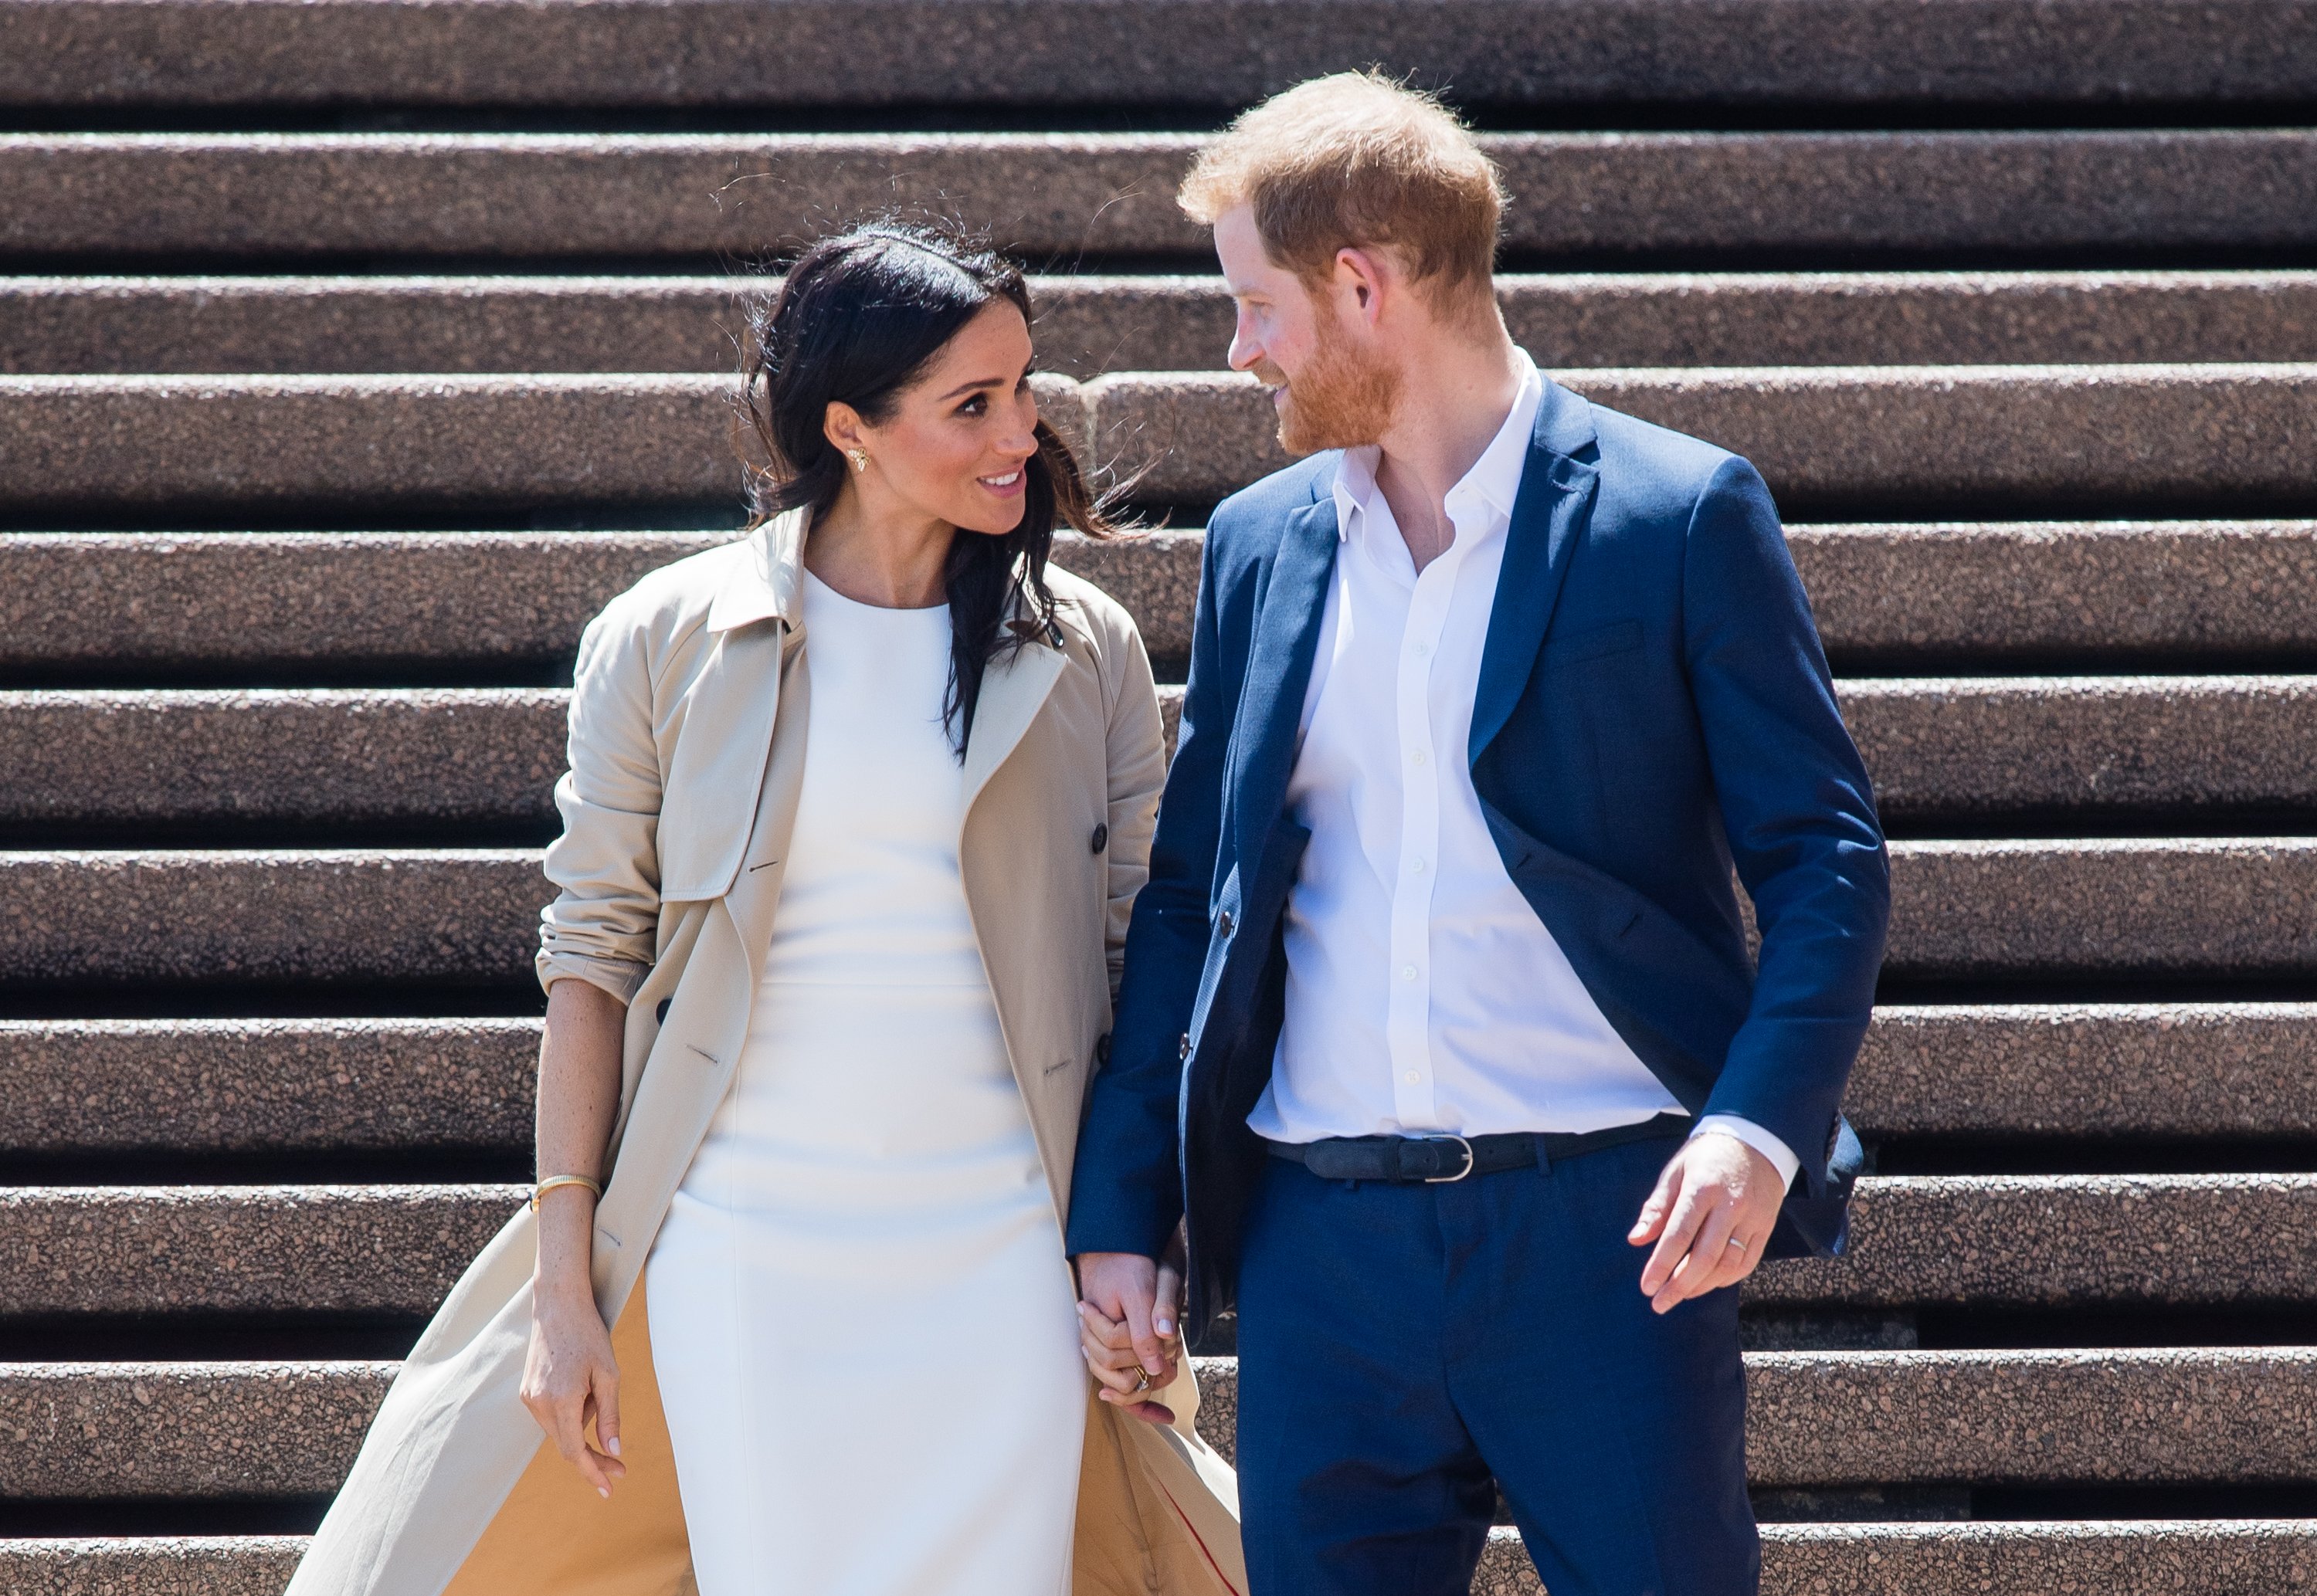 Prince Harry and Meghan Markle in Sydney Australia in 2018. | Source: Getty Images 